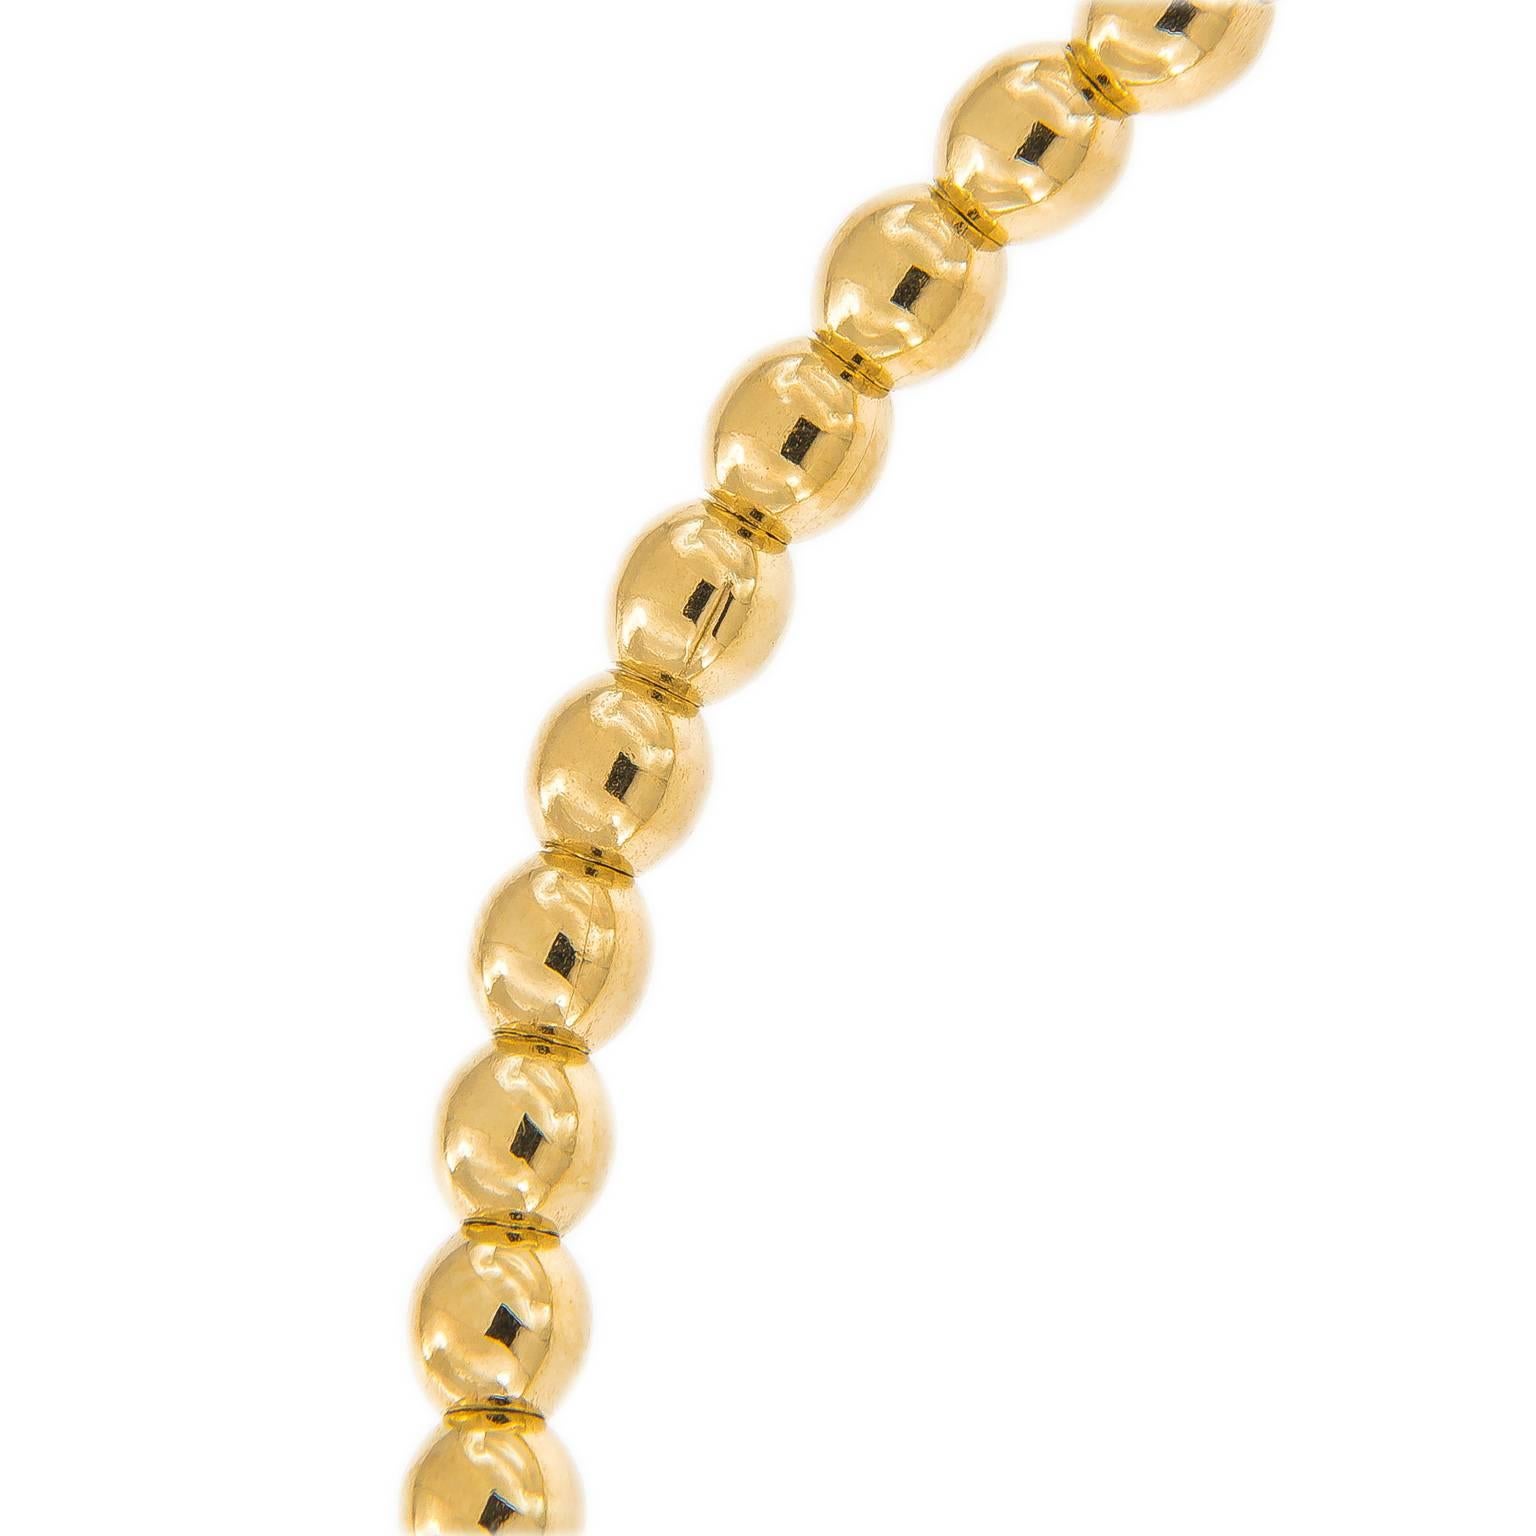 This graceful 18k yellow gold beaded bracelet, custom made in Italy for Campanelli & Pear features 20 sparkling round diamonds set in a gold bar. Bracelet is constructed with a unique stainless steel coil mechanism that allows the bracelet to